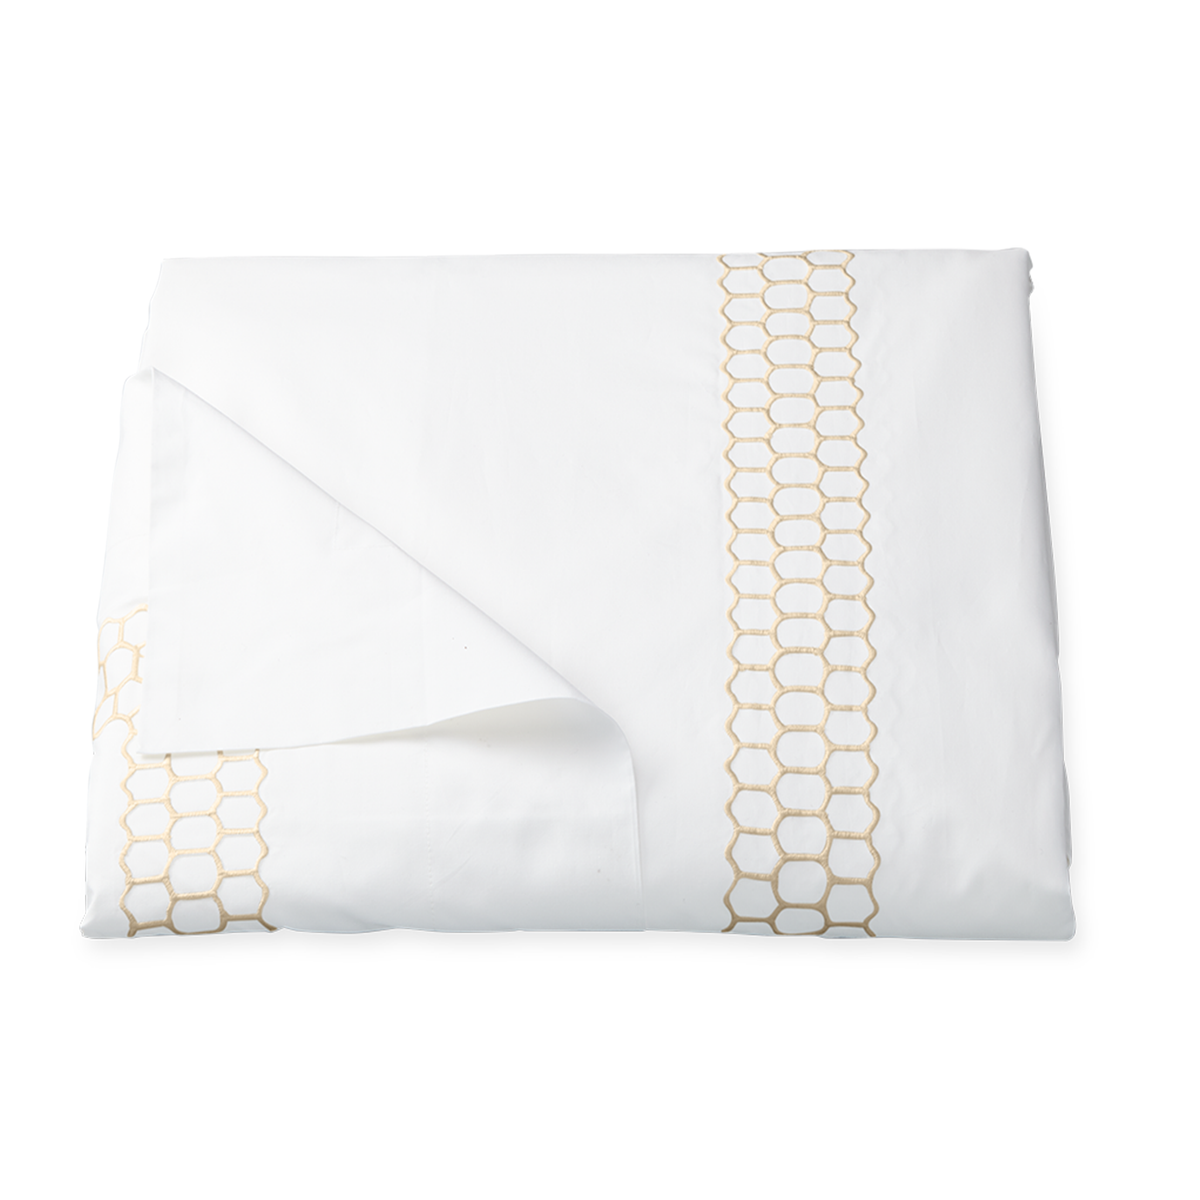 Clear Image of Matouk Liana Bedding Duvet Cover in Champagne Color